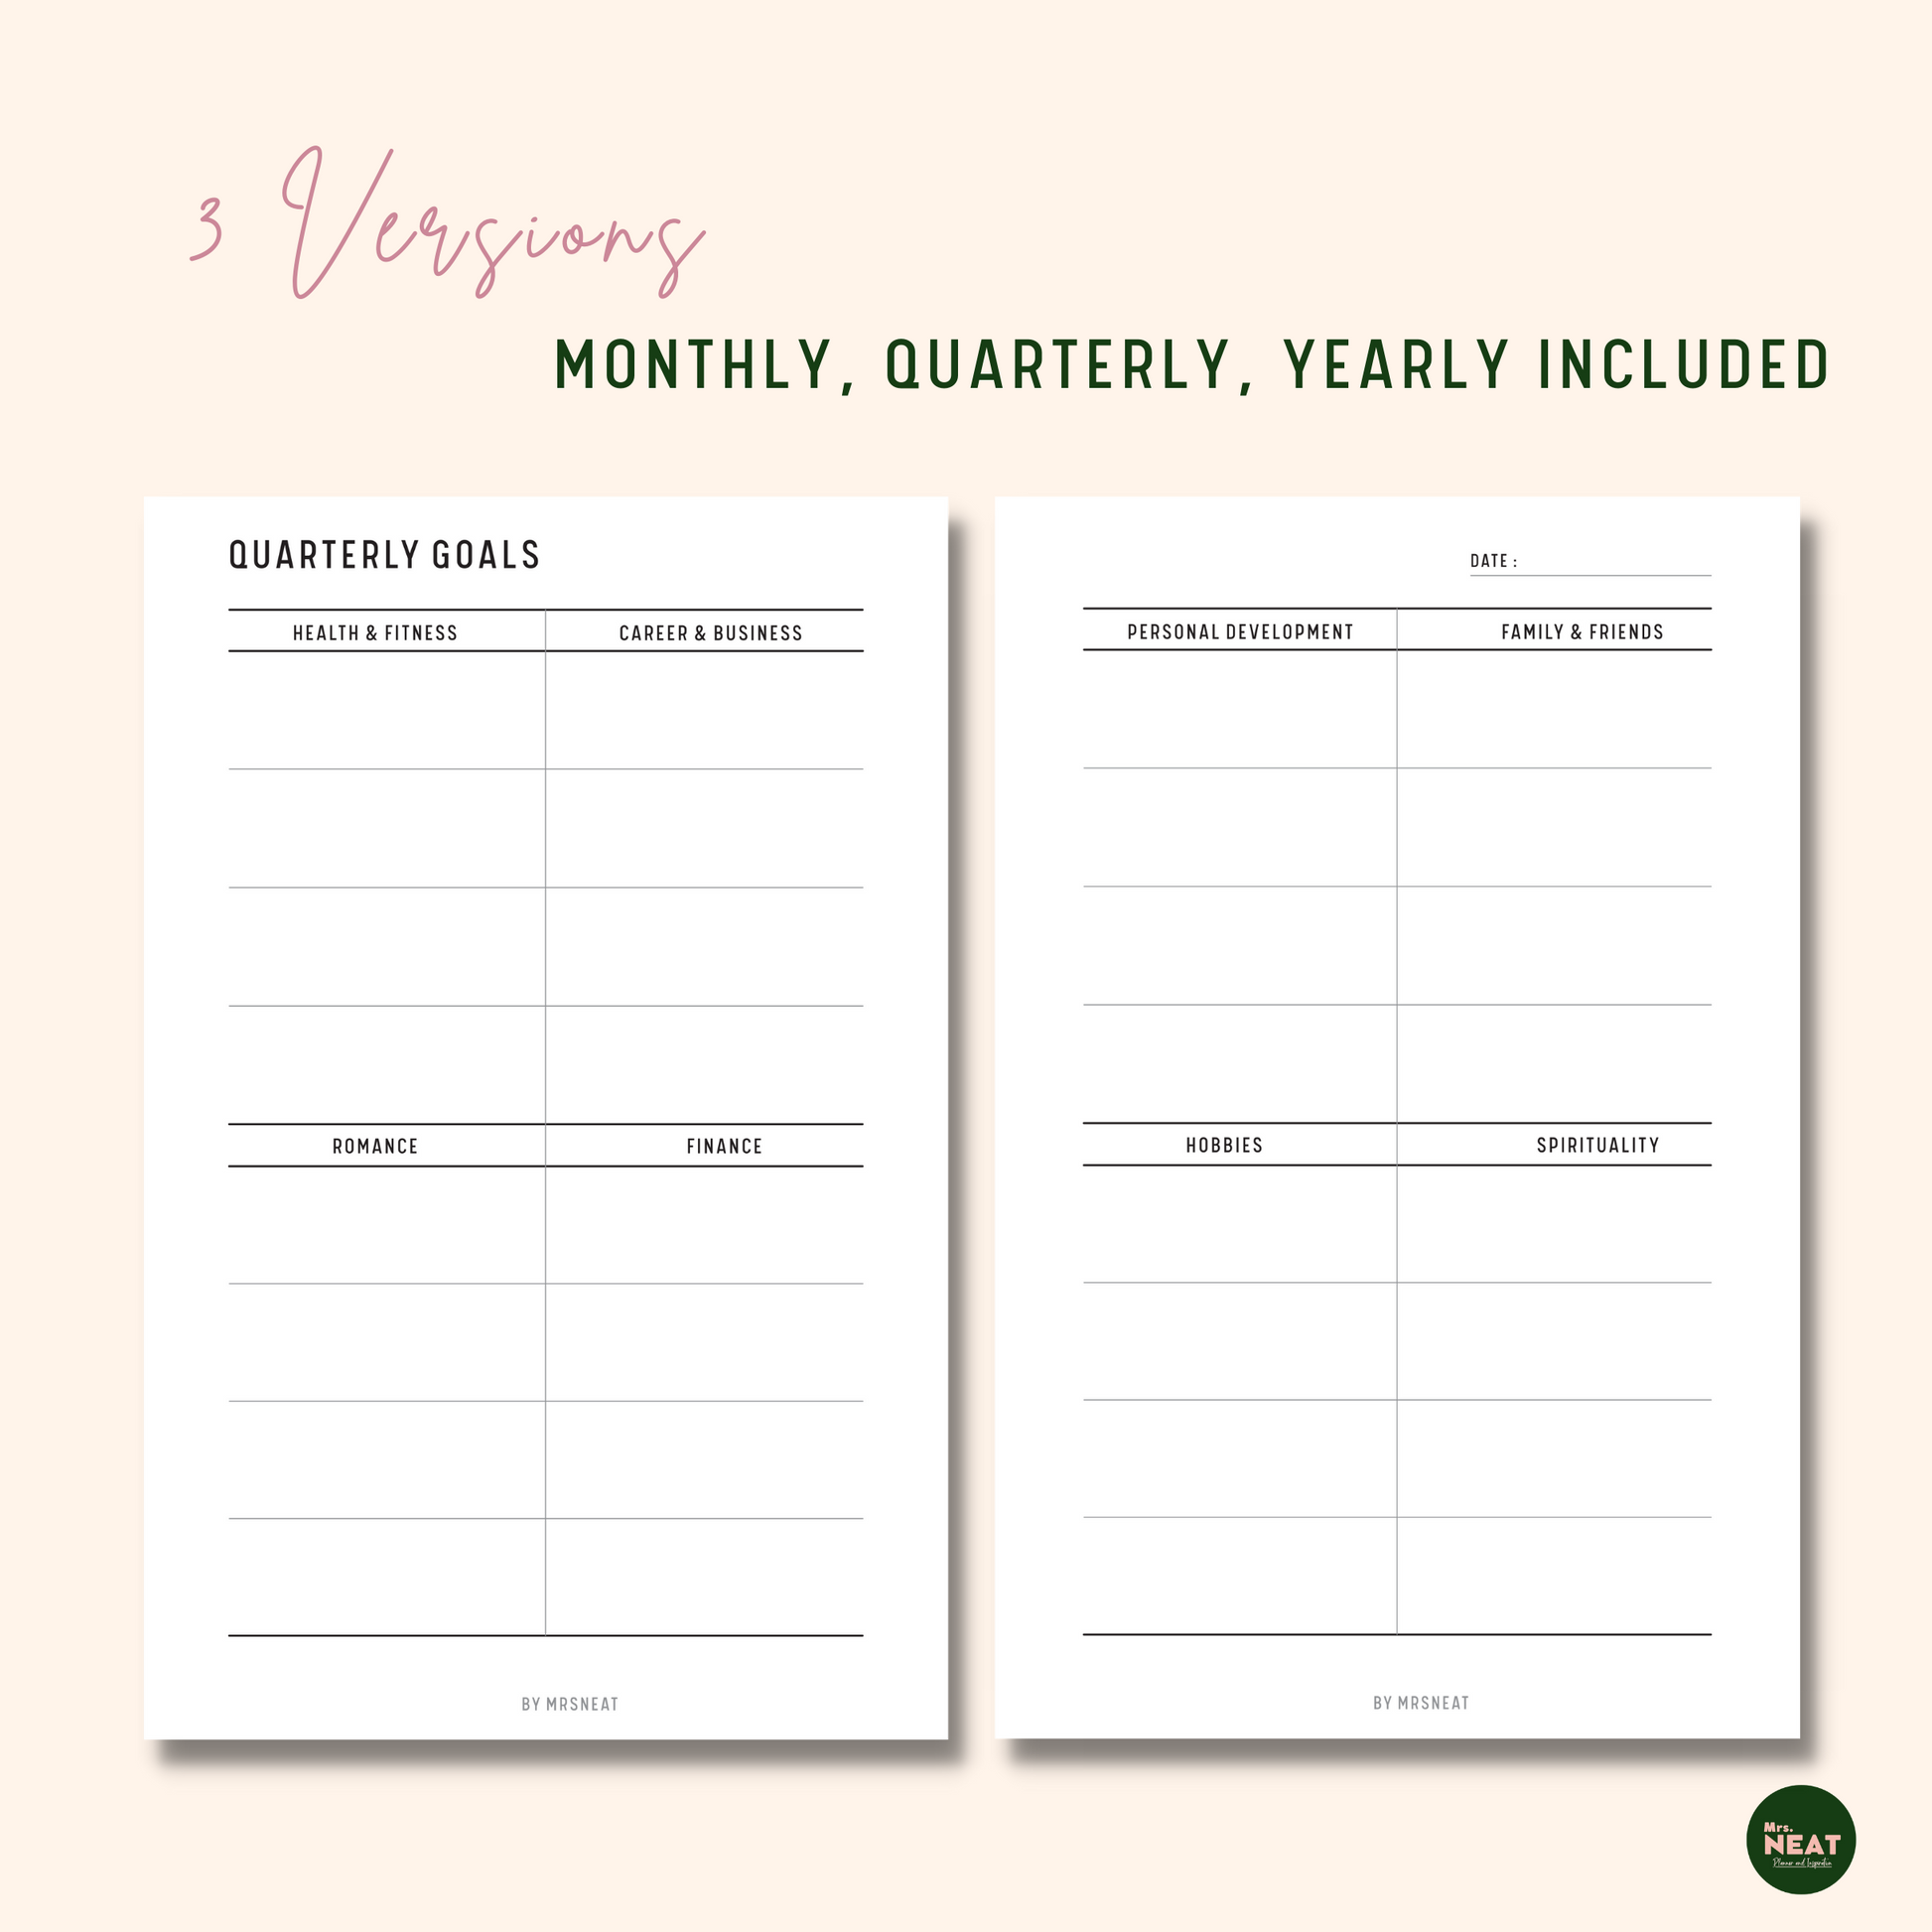 Clean 8 Areas of Life Goal Planner for Quarterly Goals in 2 Pages